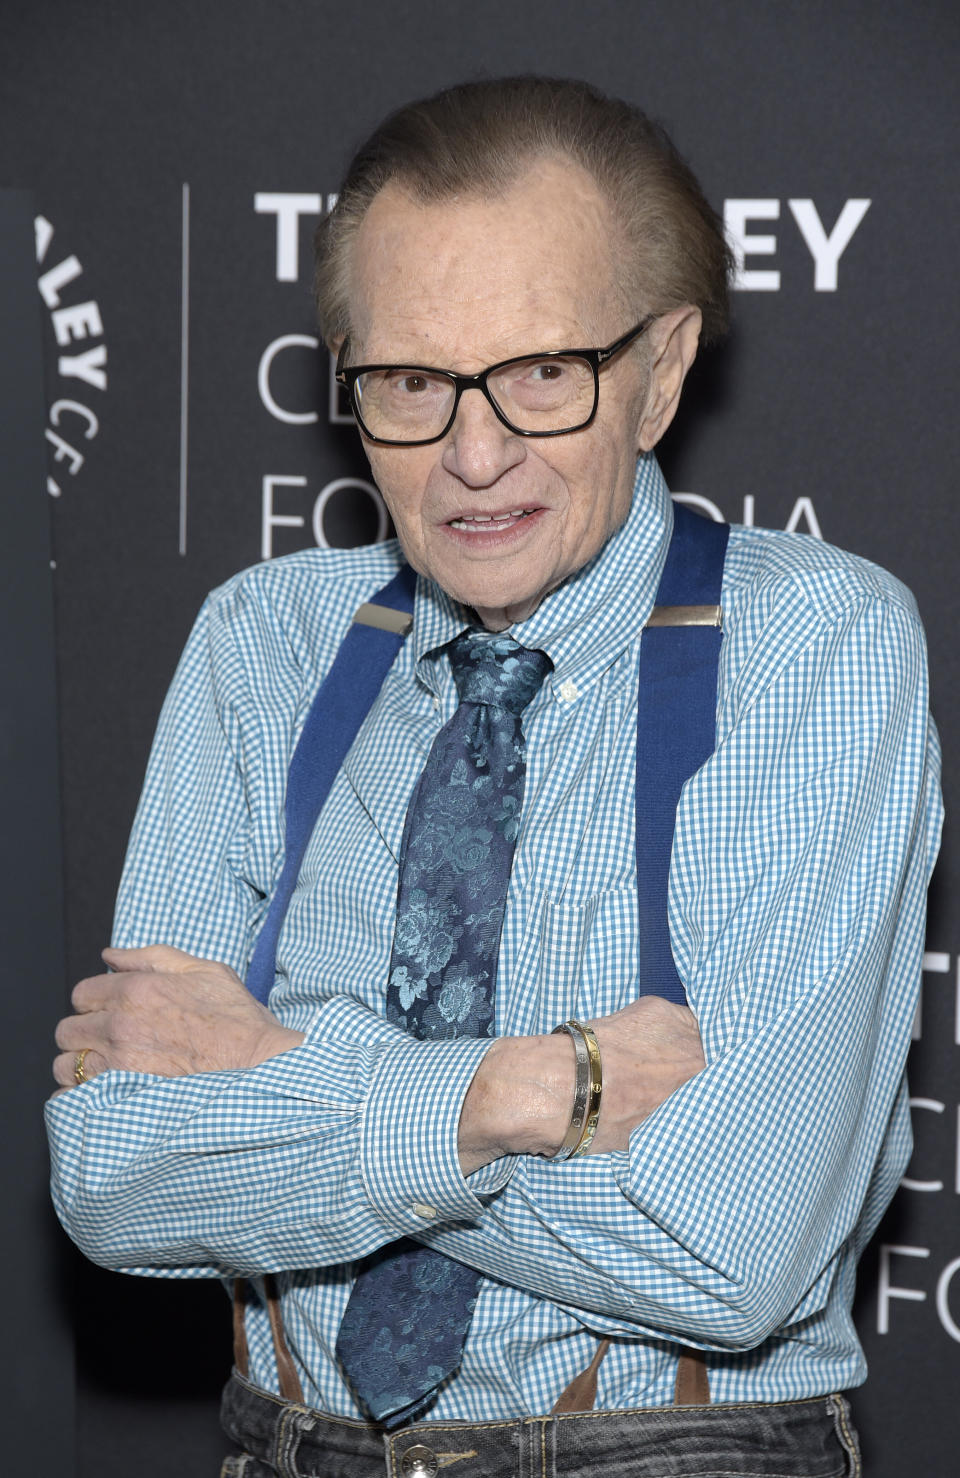 Larry King, pictured in February, suffered a heart attack last week. (Photo: Michael Tullberg/Getty Images)